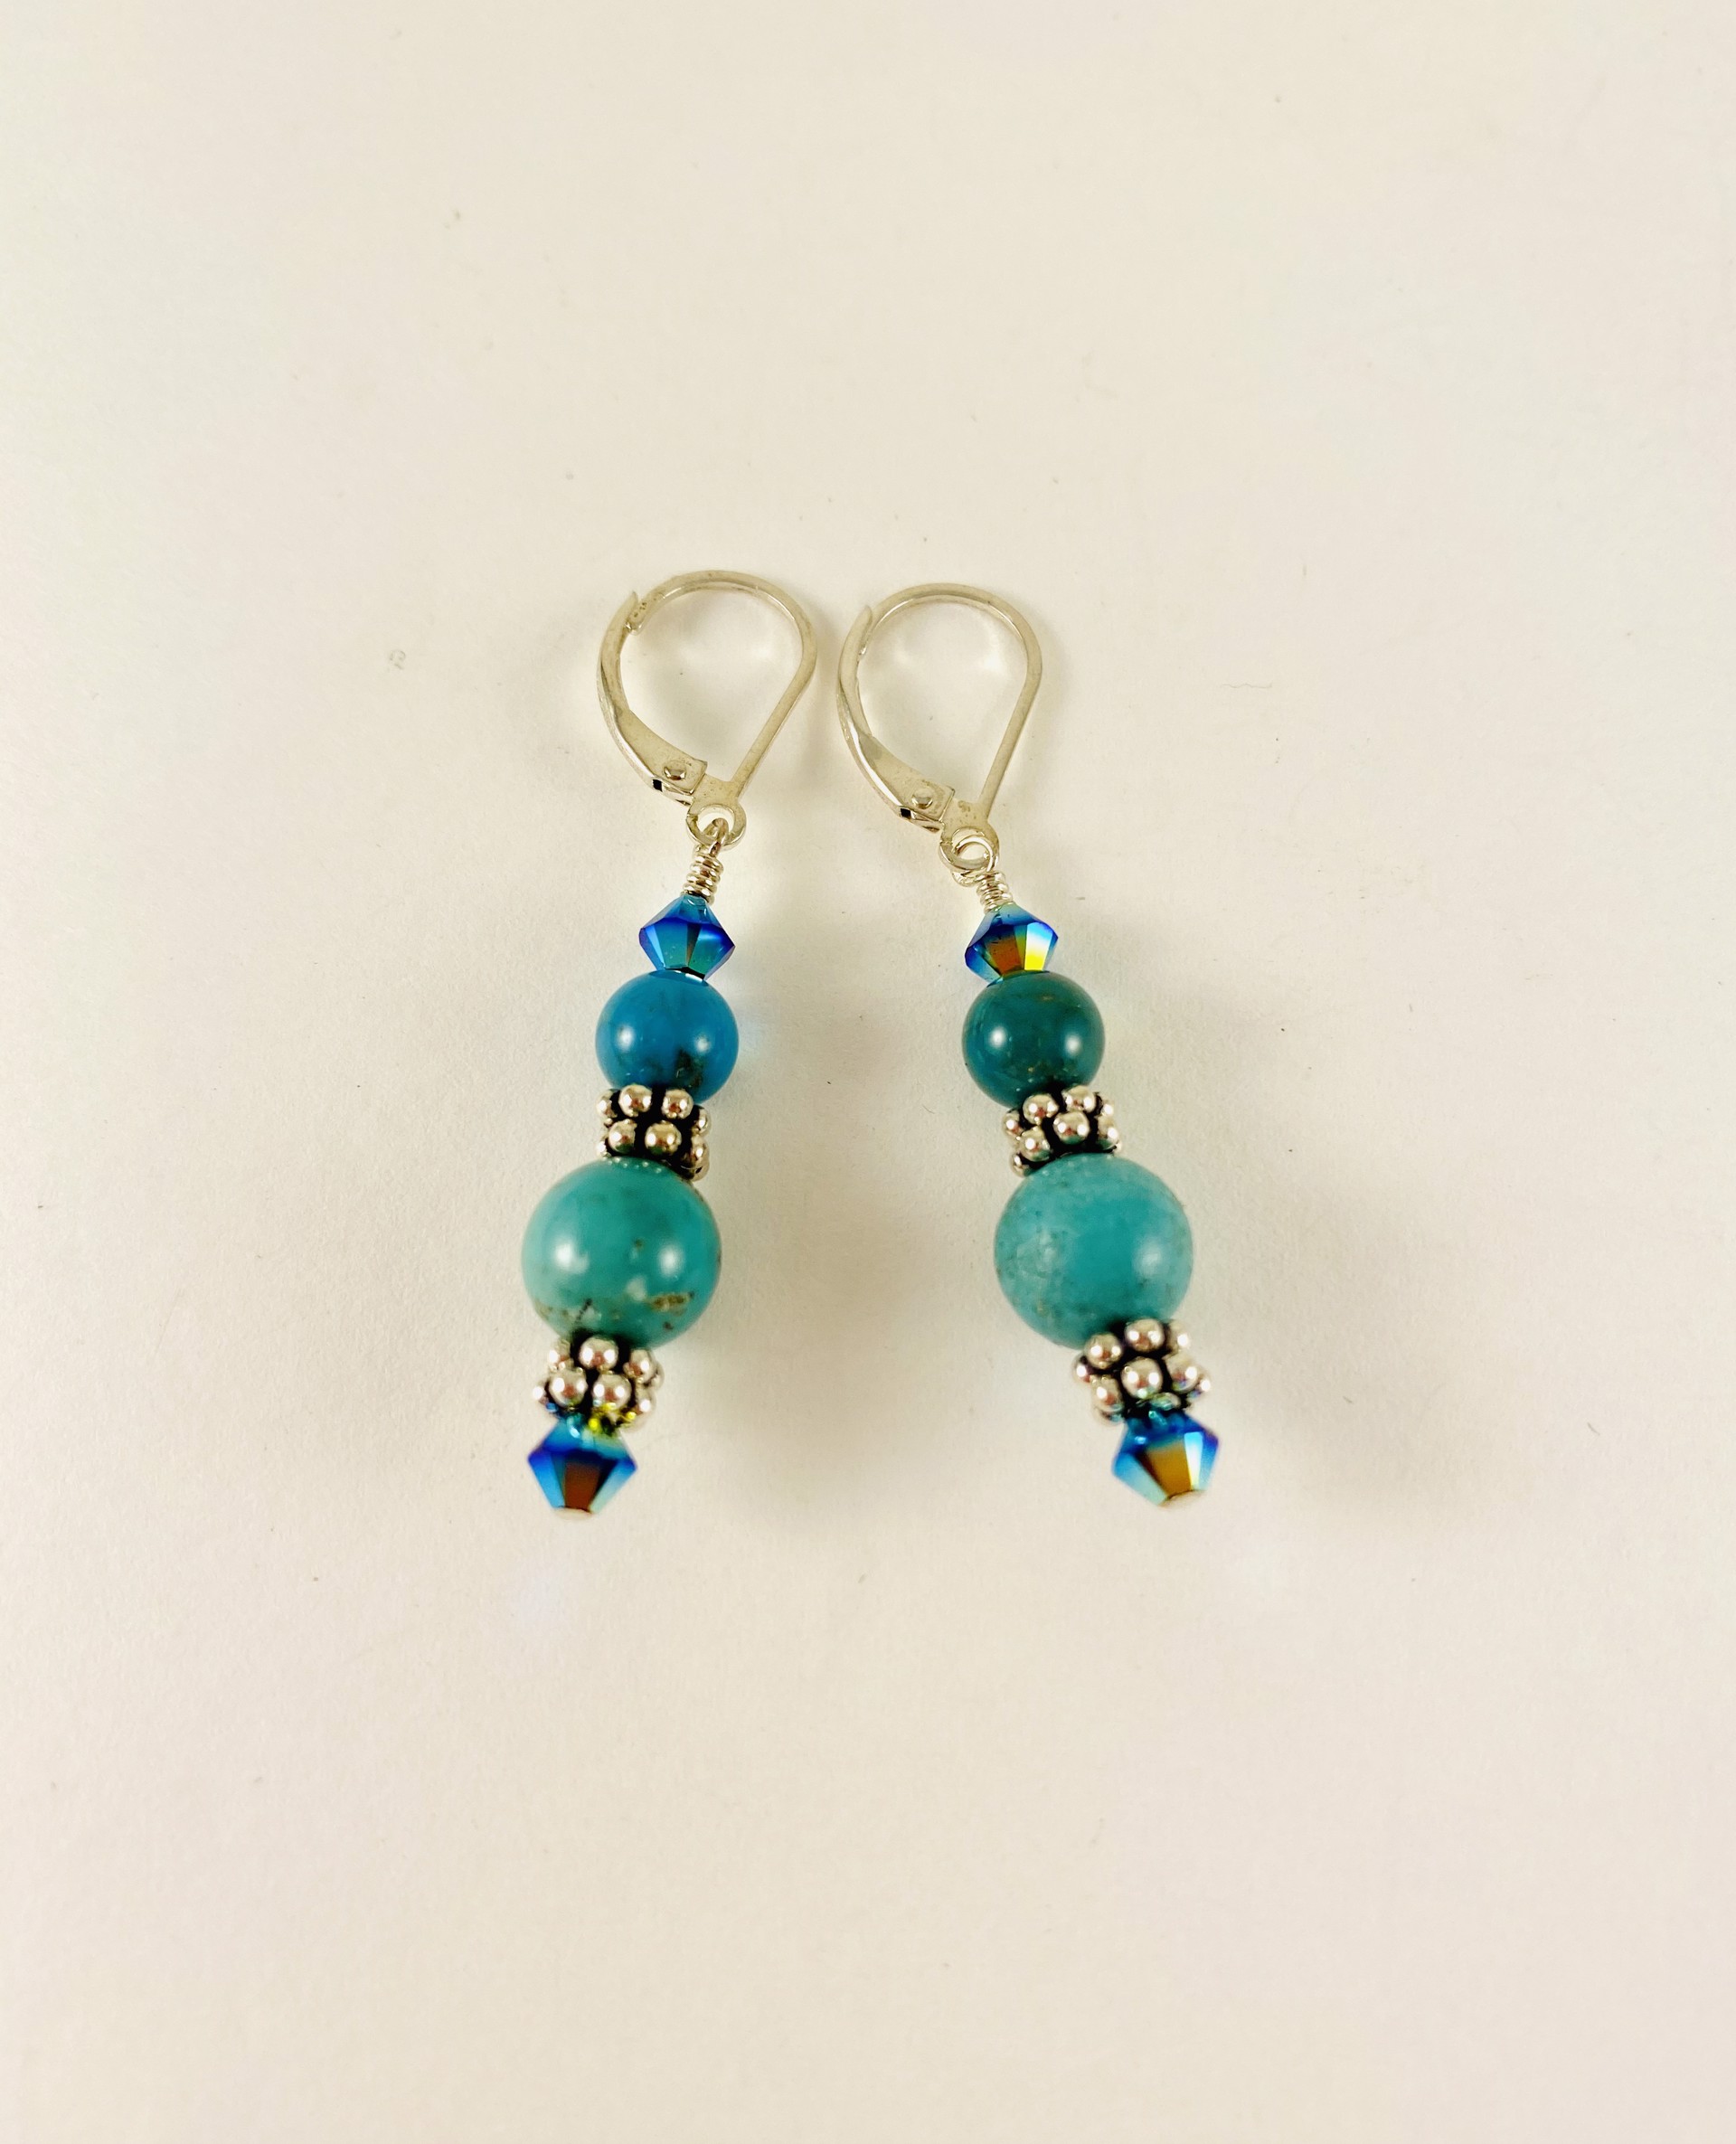 Turquoise, Crystal, Silver Earrings SHOSH19-E4 by Shoshannah Weinisch